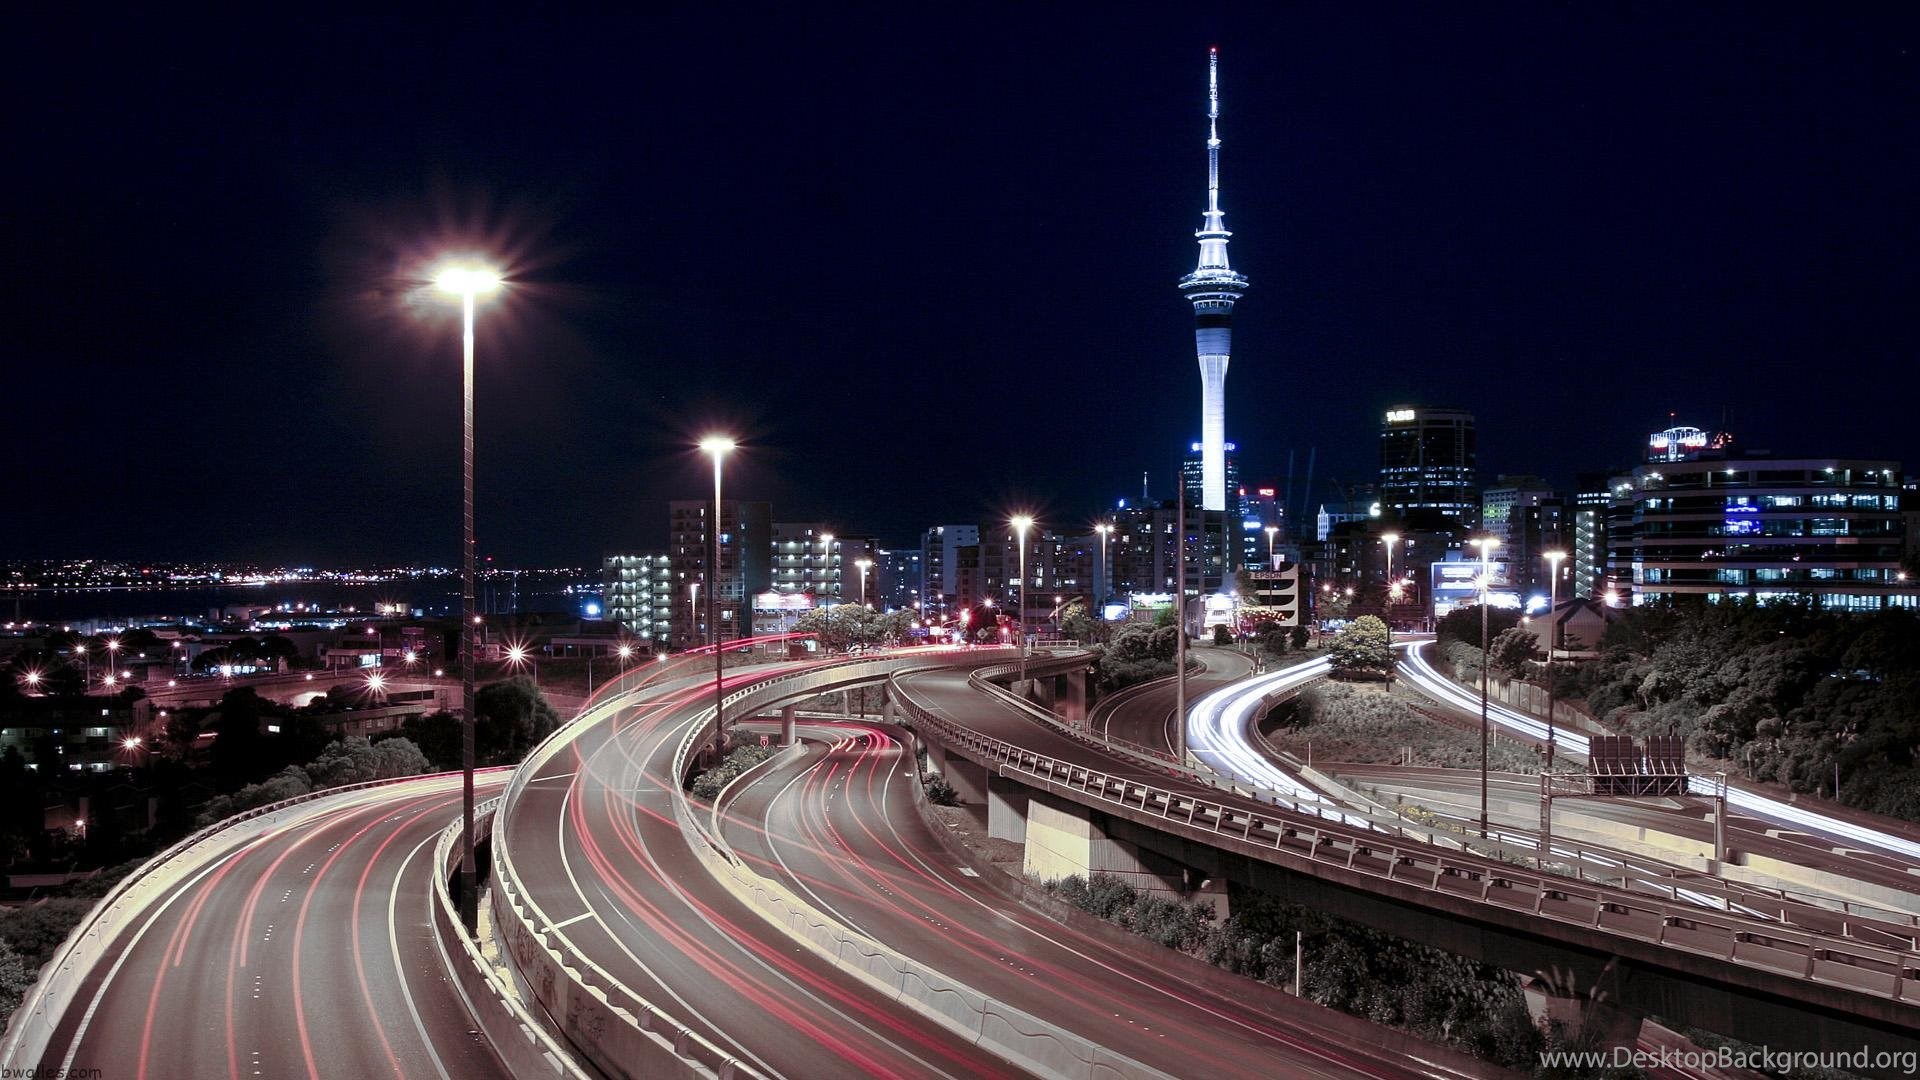 Busy City With Night Traffic HQ Wallpaper (5494) Desktop Background